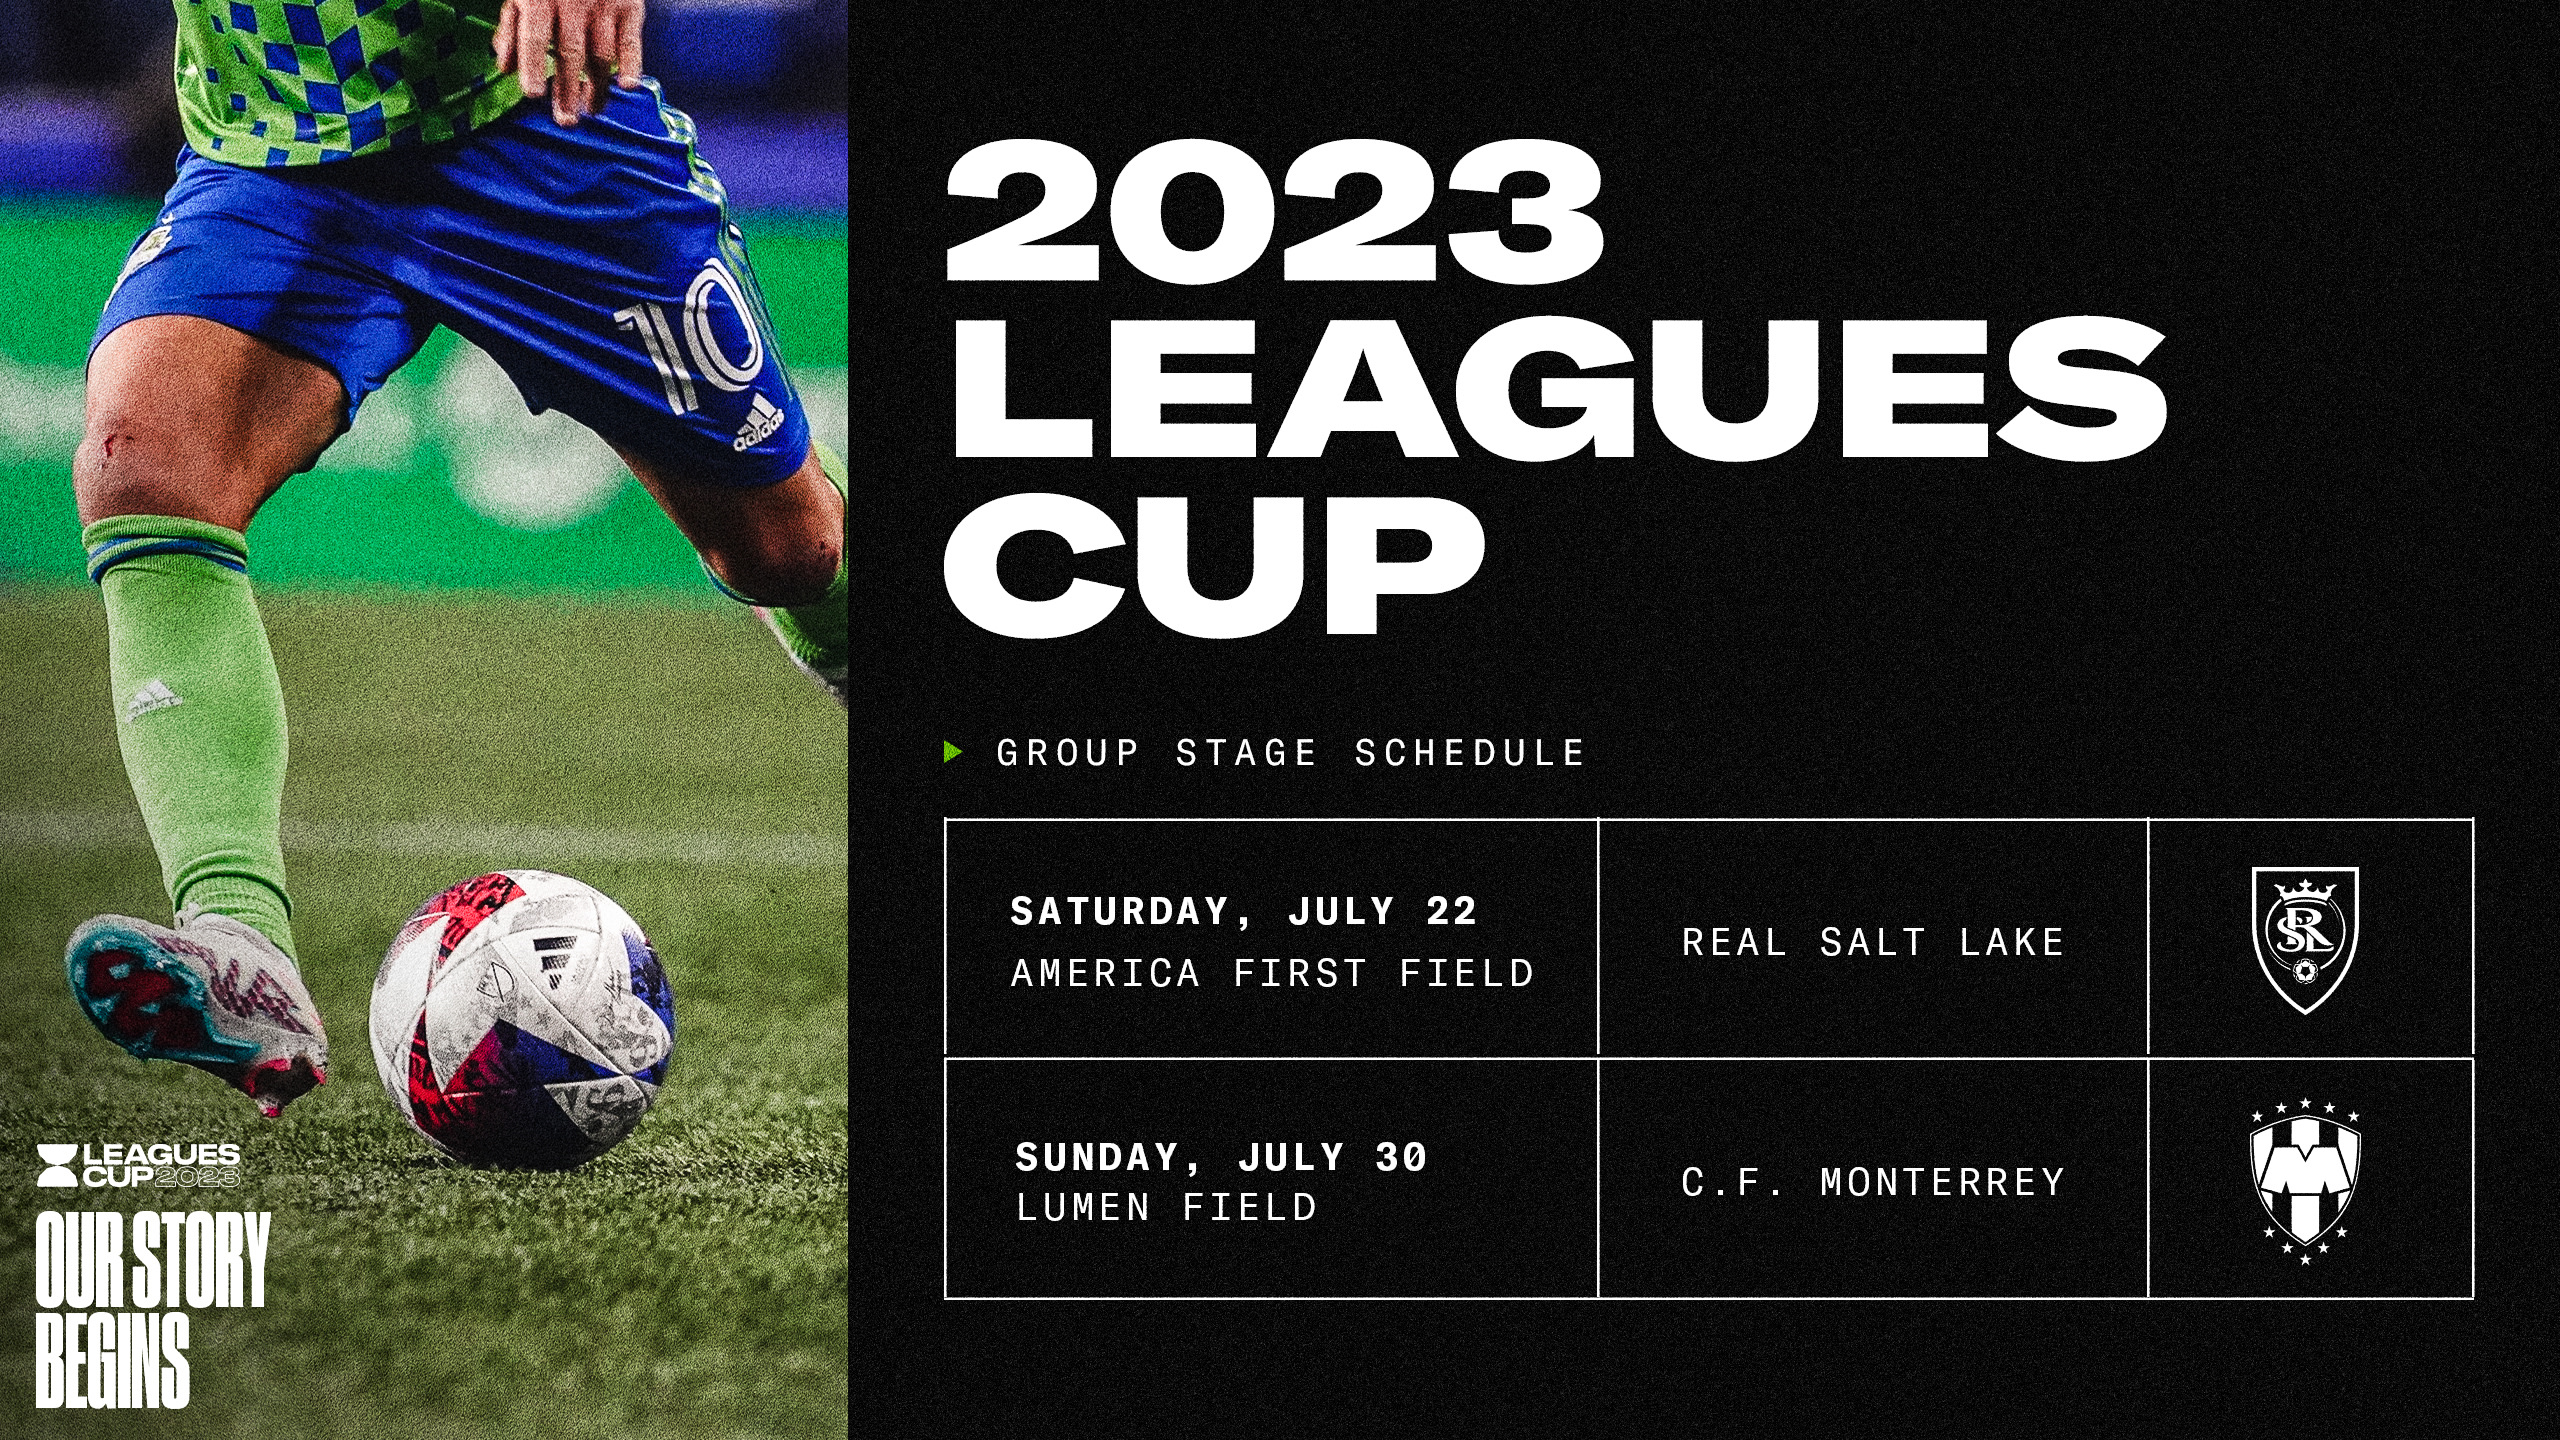 Leagues Cup 2023 Round of 16 Match Schedule is Set